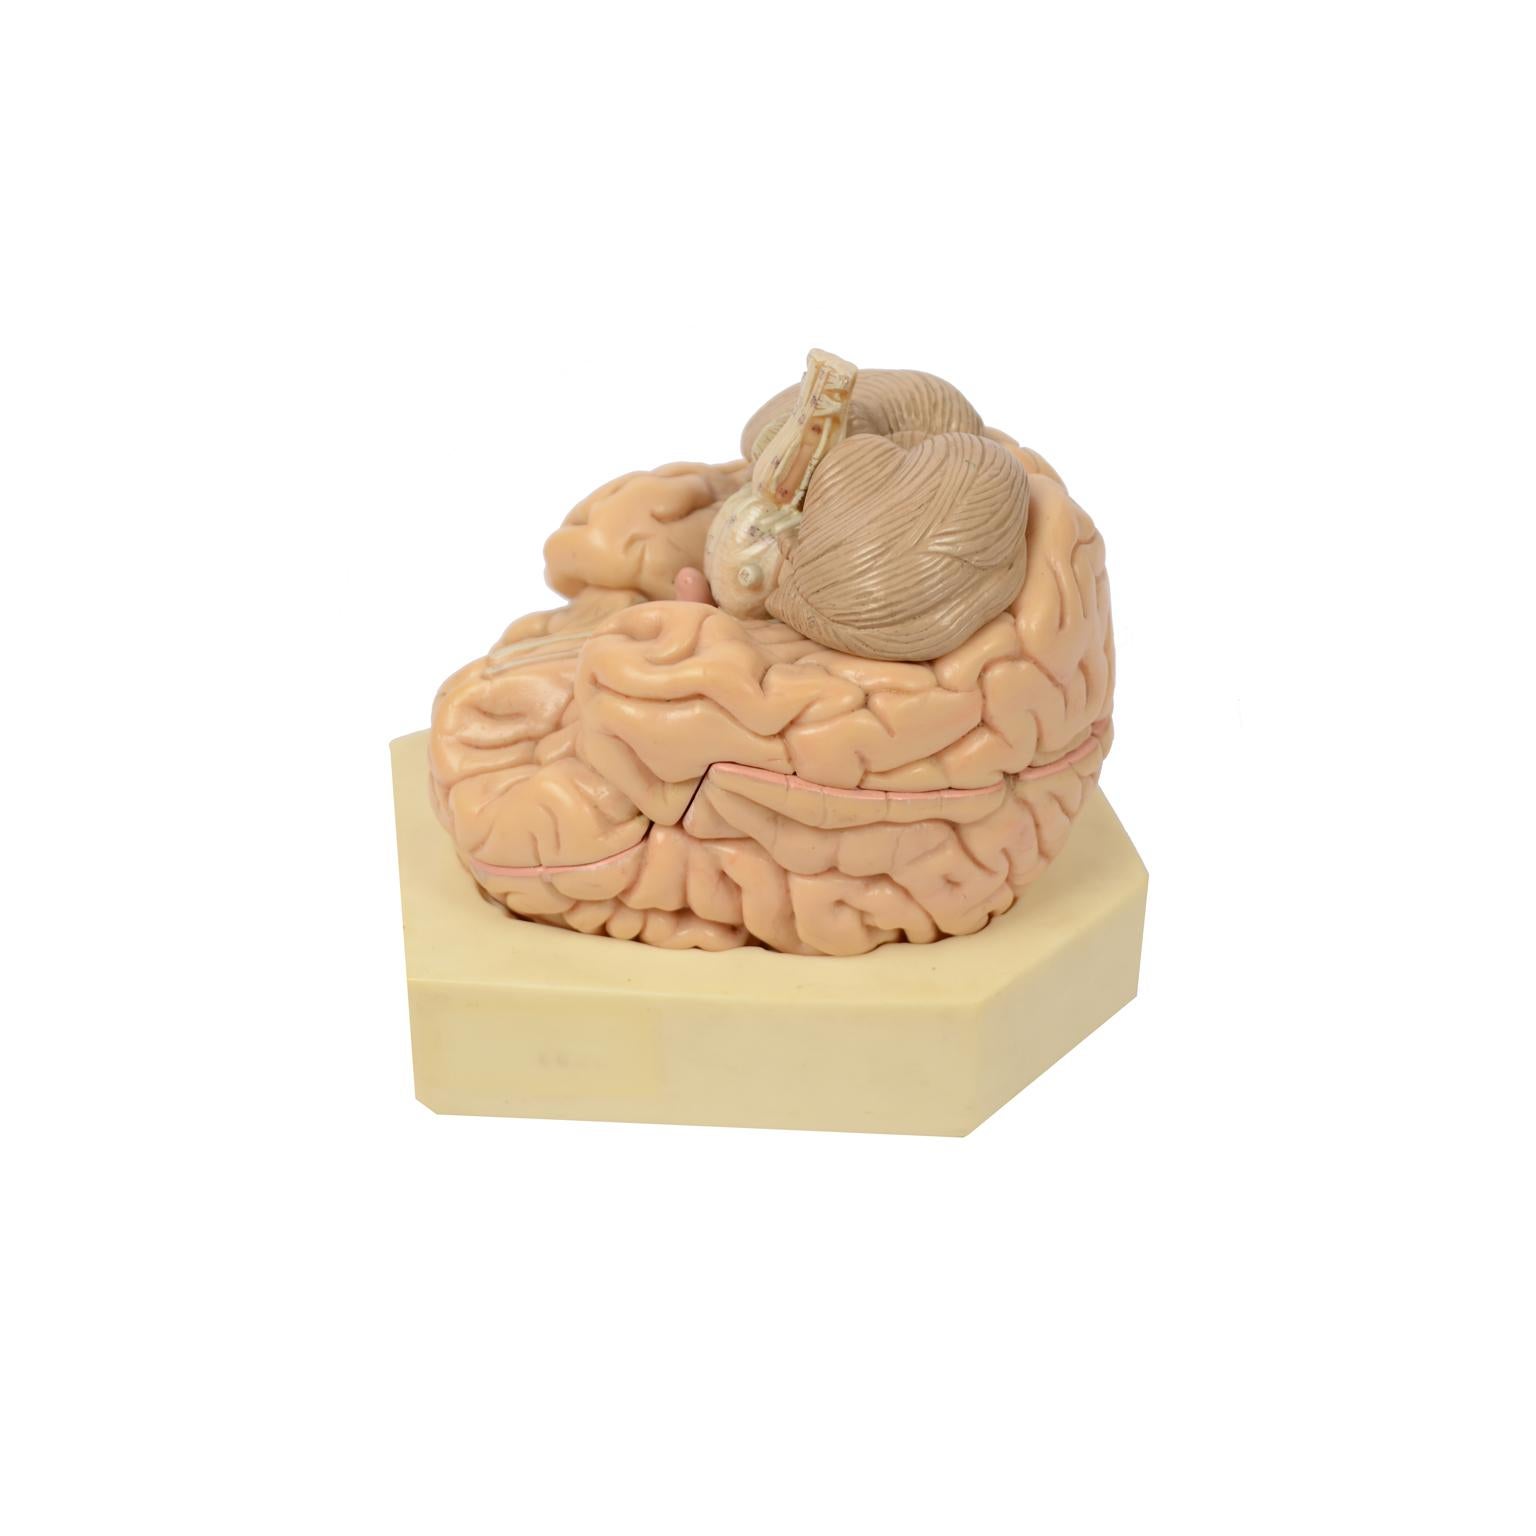 Didactic model of a human brain that can be dismounted into 4 parts placed on a base. Made of hand-colored resin in the 1950s by Somso, German company active since the second half of the 19th century, always recognized as an excellence in the